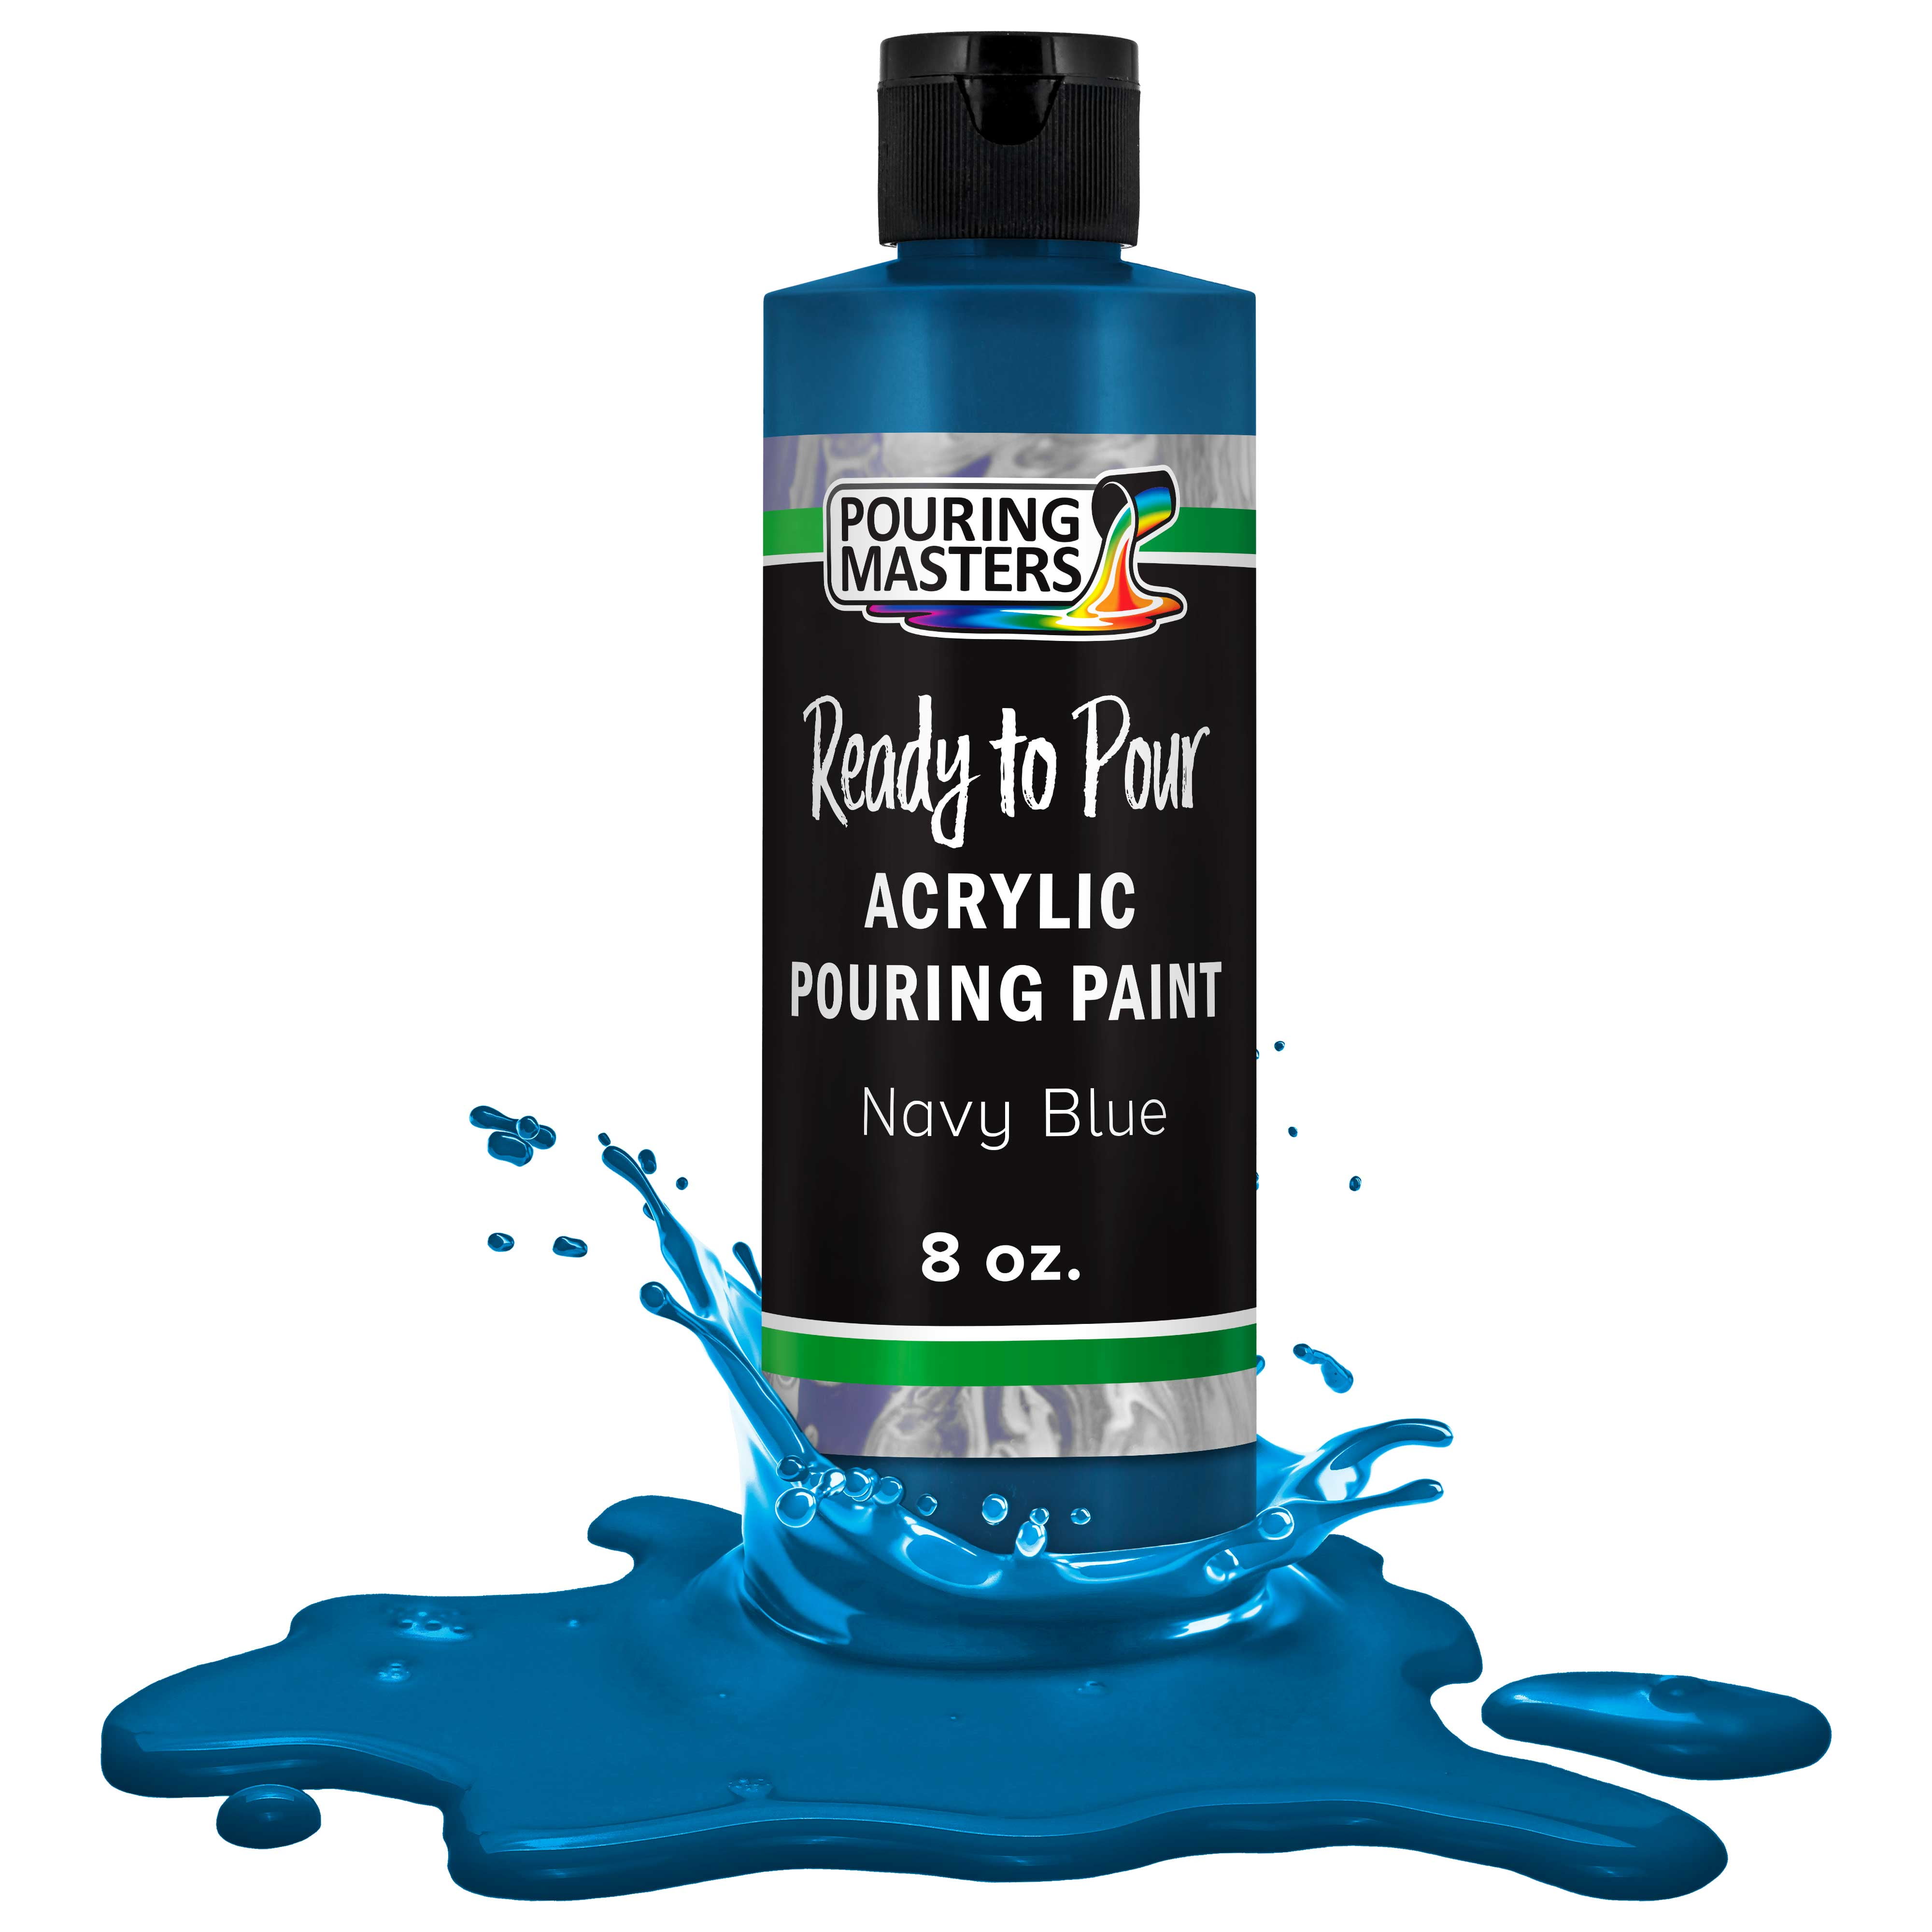 Pouring Masters Navy Blue Acrylic Ready to Pour Pouring Paint – Premium  8-Ounce Pre-Mixed Water-Based